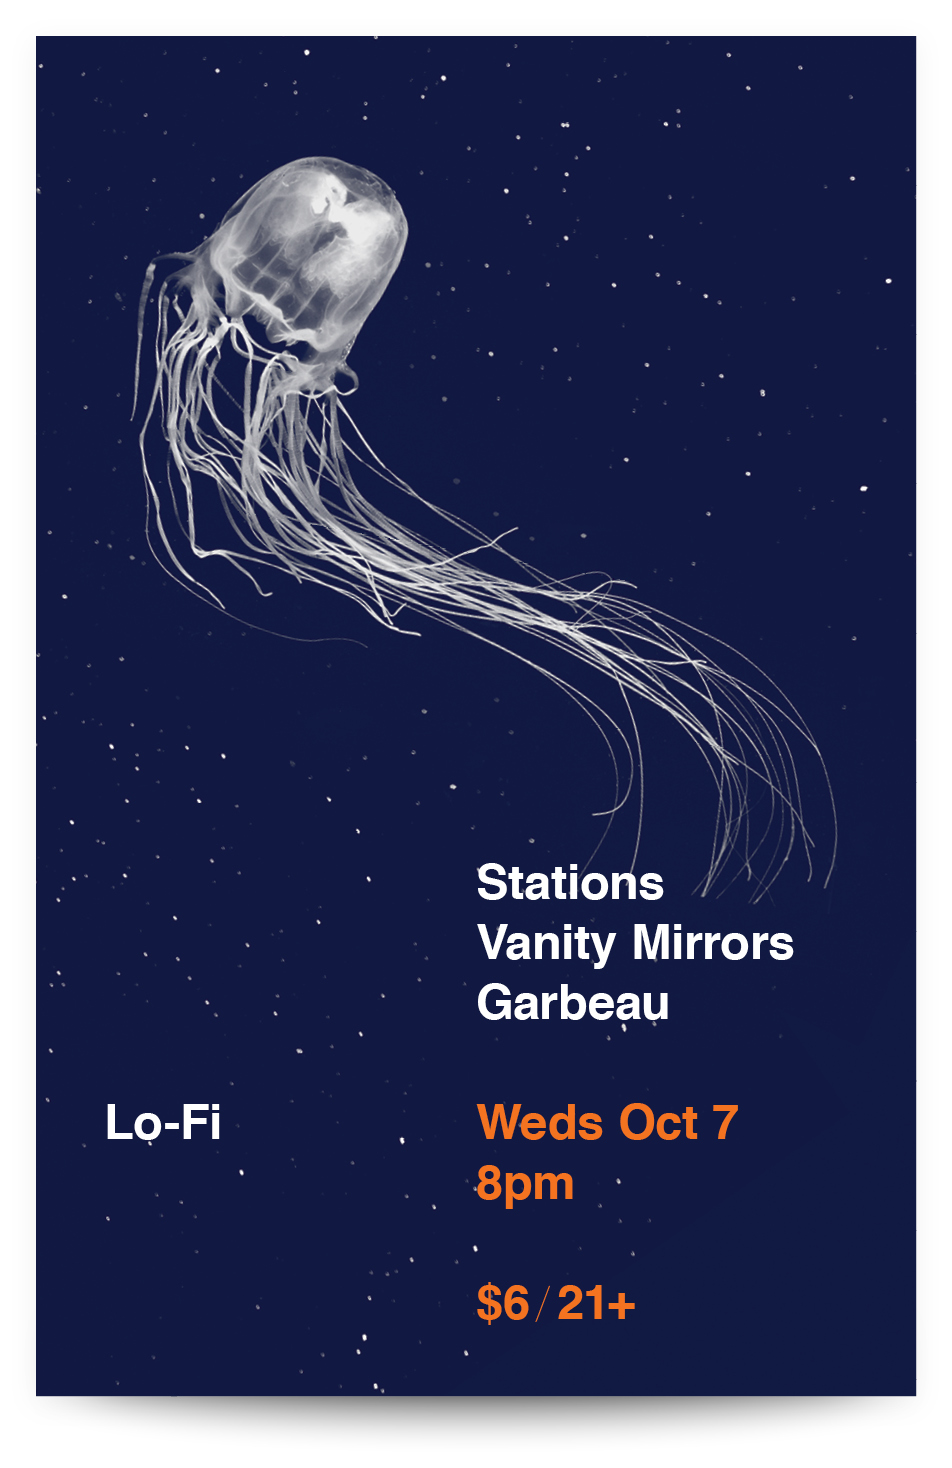 Stations band poster